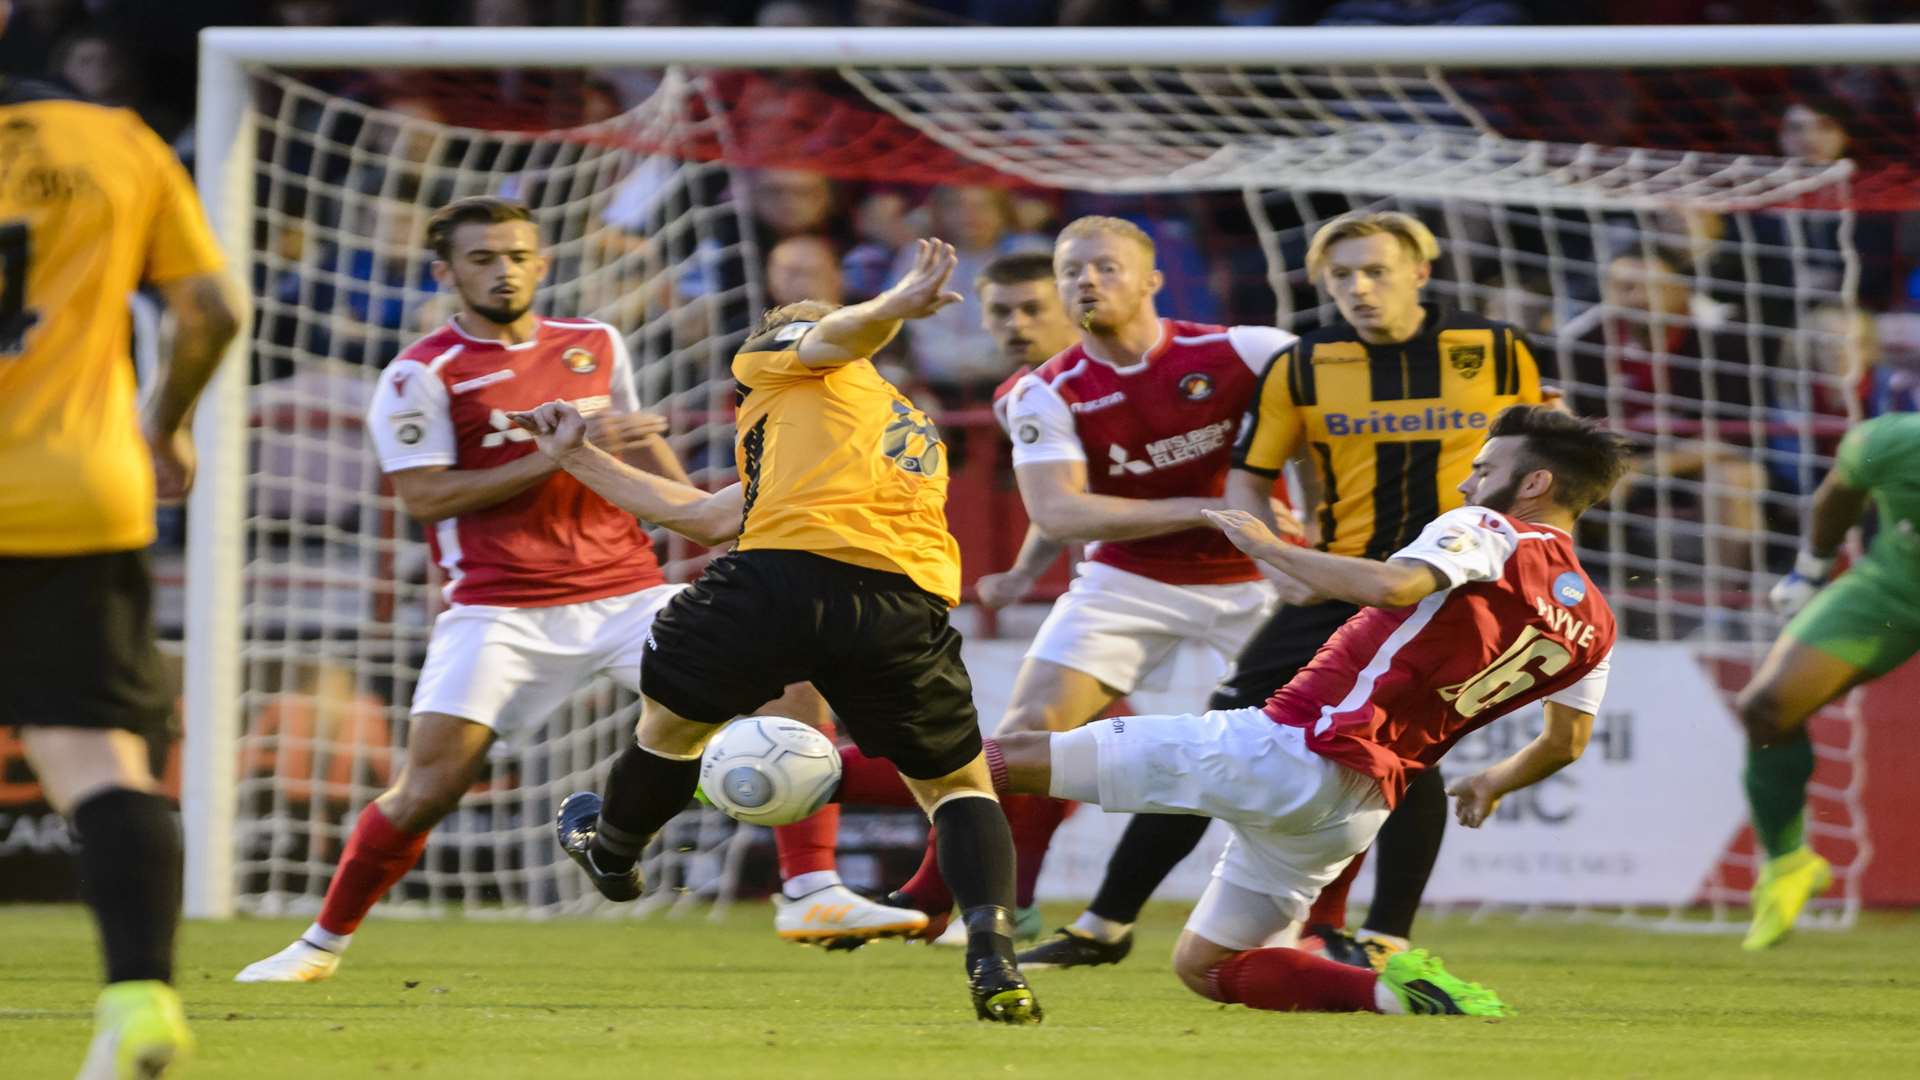 Ebbsfleet beat Maidstone 2-0 in August Picture: Andy Payton